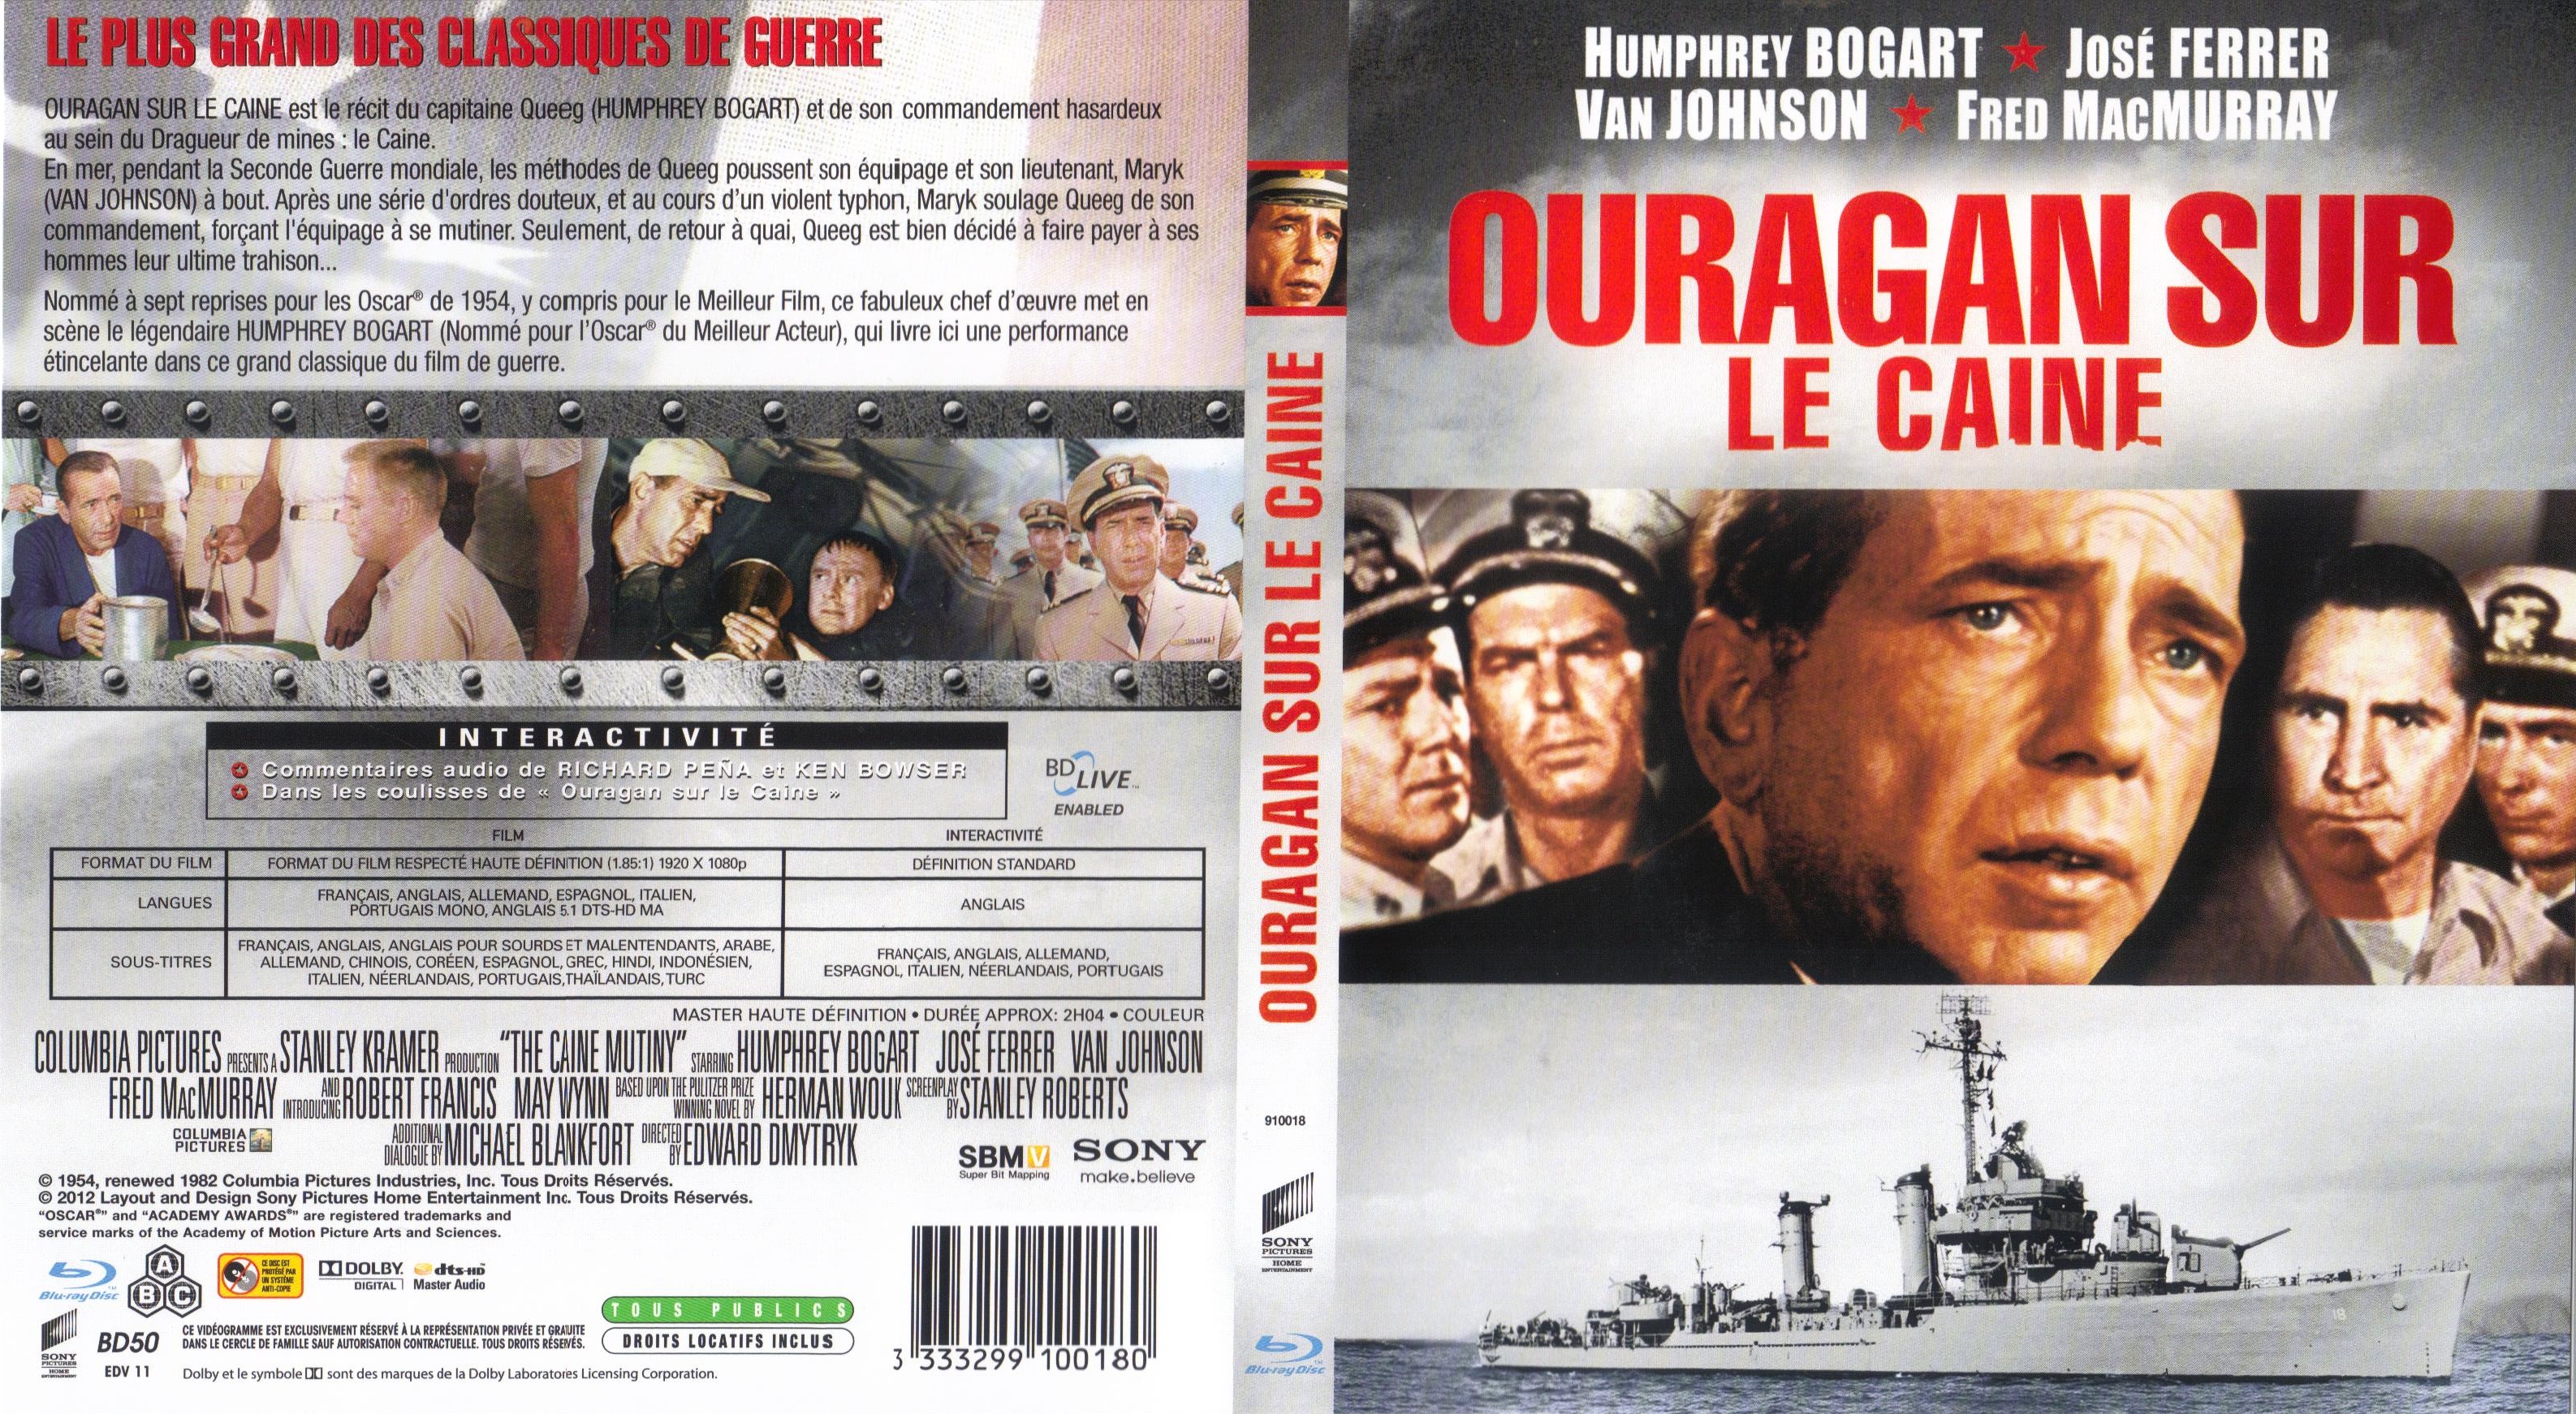 Jaquette DVD Ouragan sur le Caine (BLU-RAY)